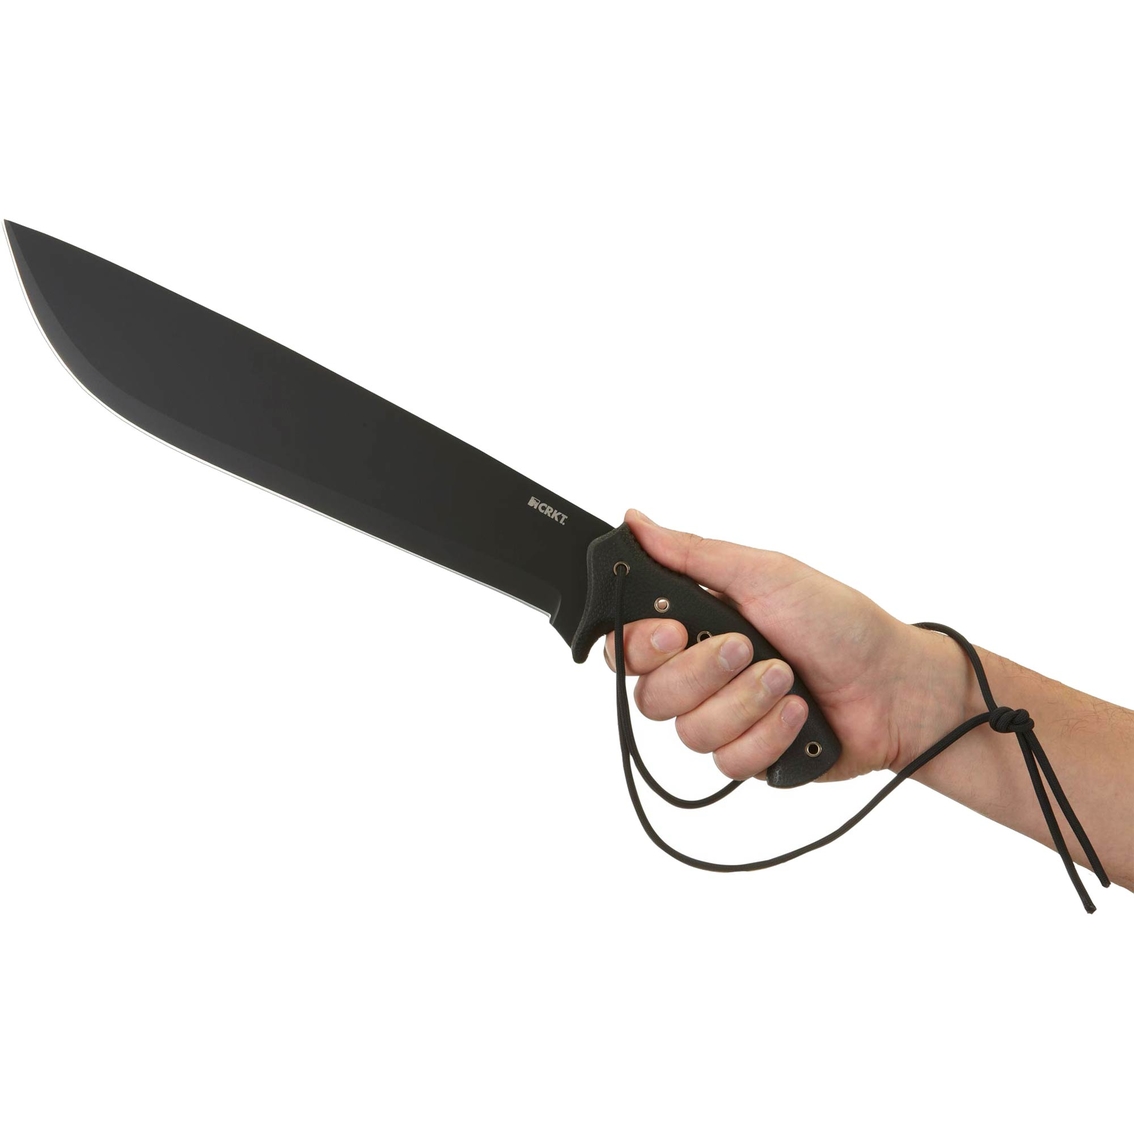 Columbia River Knife & Tool Chanceinhell Machete, Black, Lined Woven Sheath - Image 4 of 4